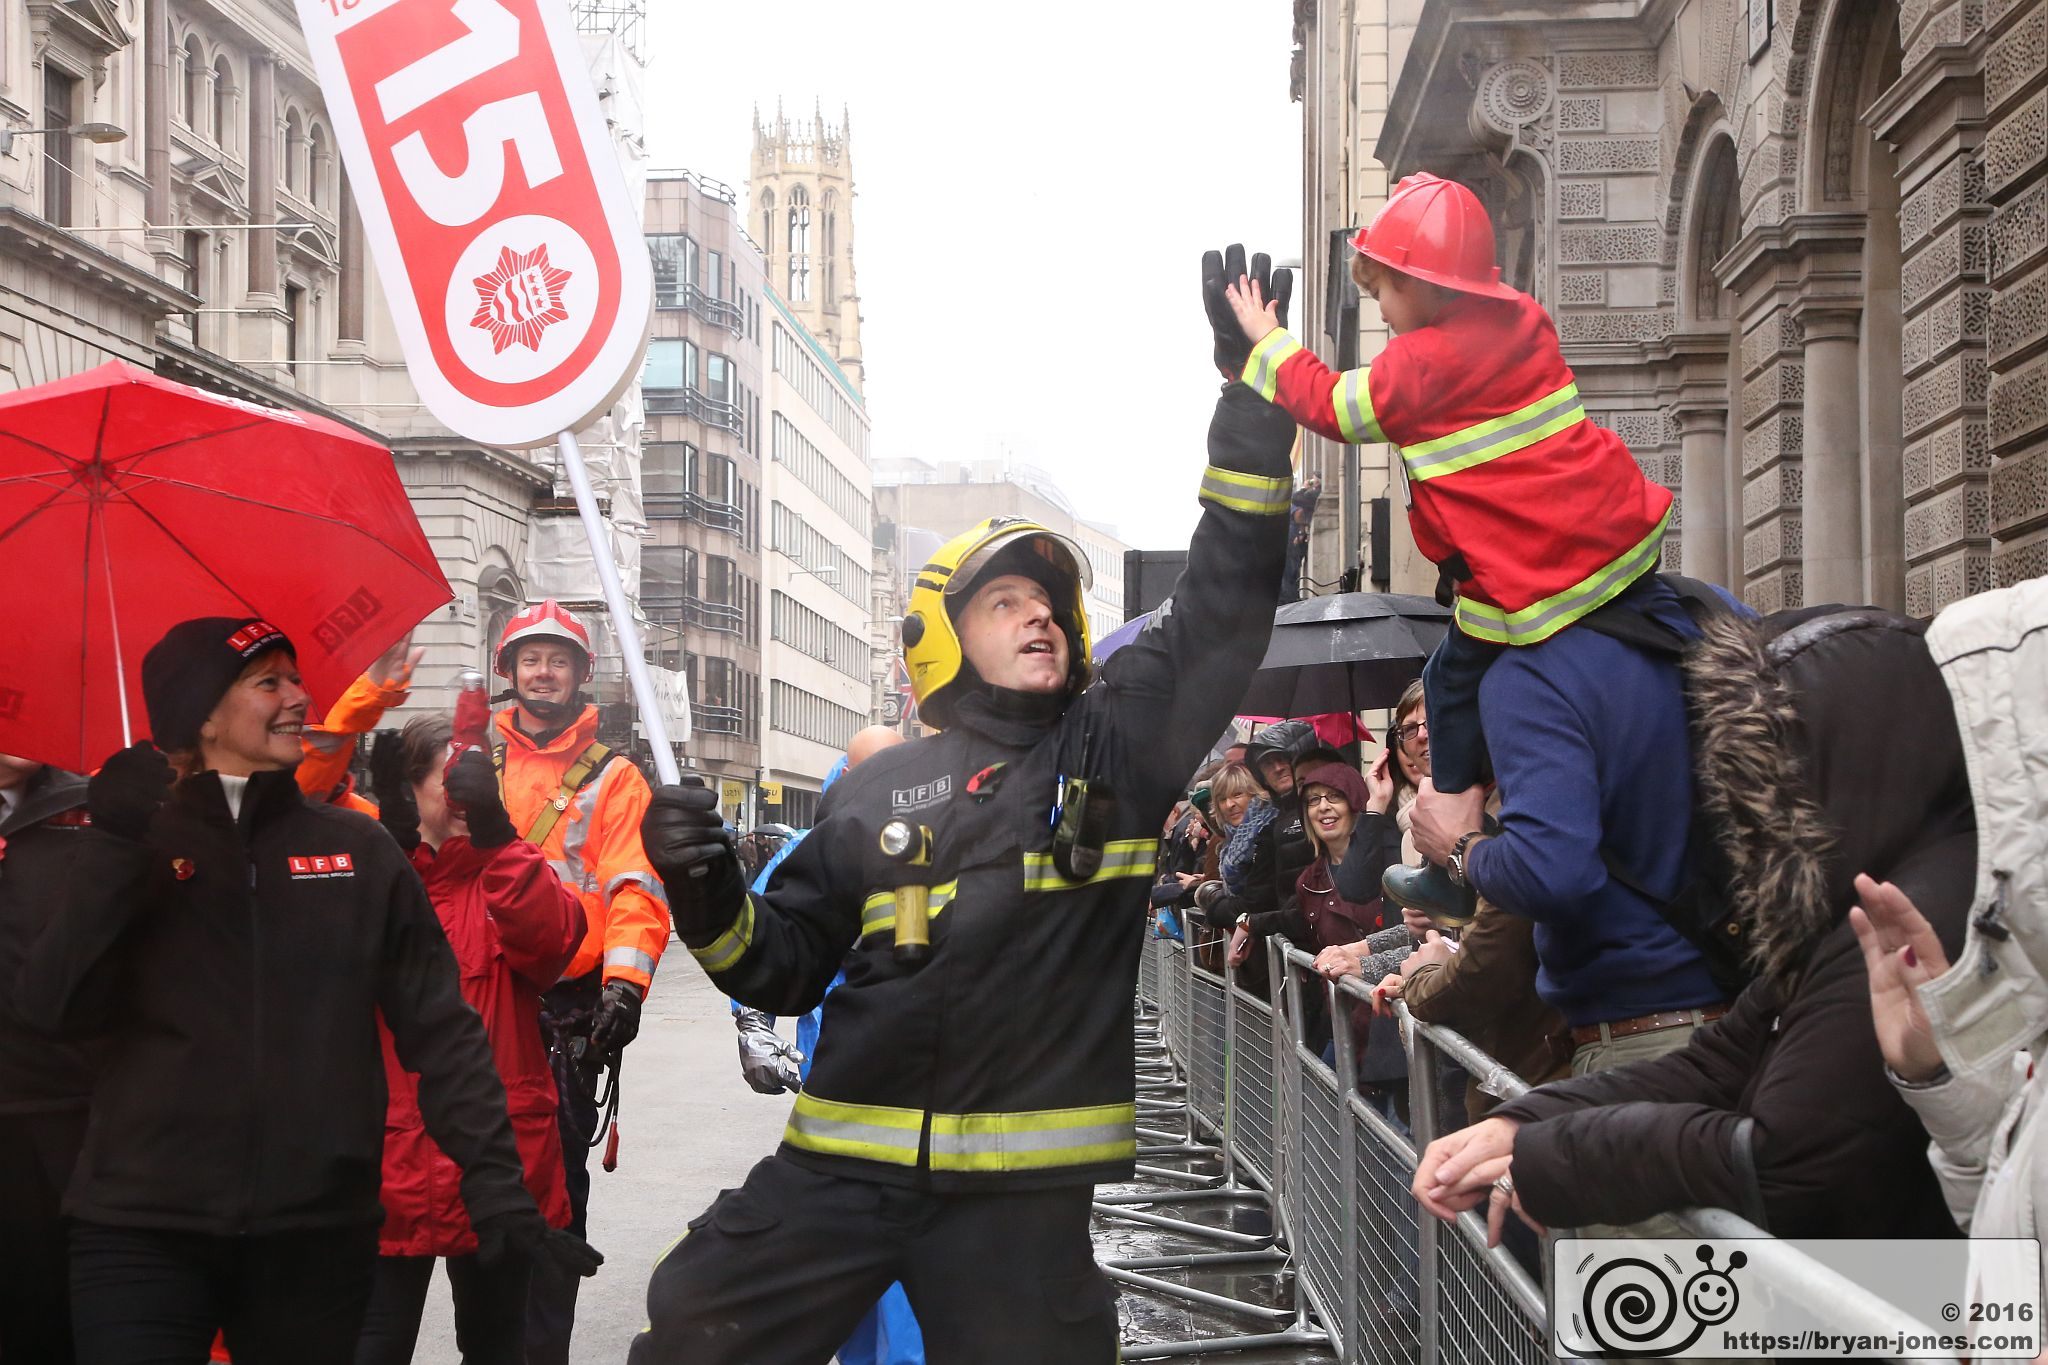 LFB firefighter and child high five at the 2016 Lord Mayor's Show. This is the original image used for the LFB150 photo mosaic